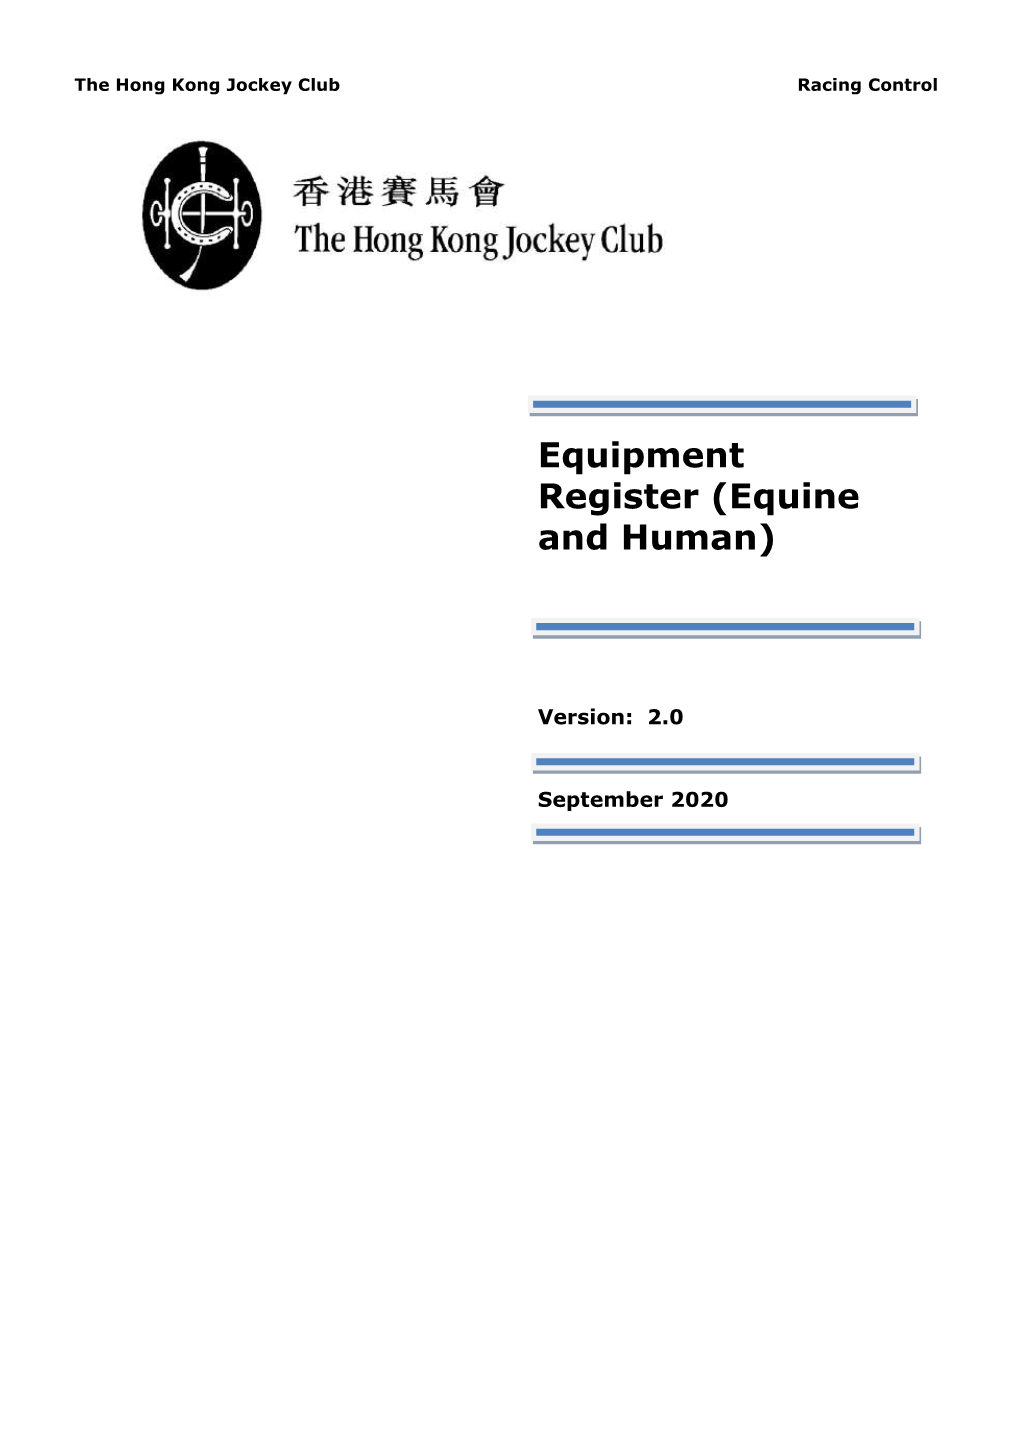 Download Full Version "Equipment Register (Equine and Human) Of